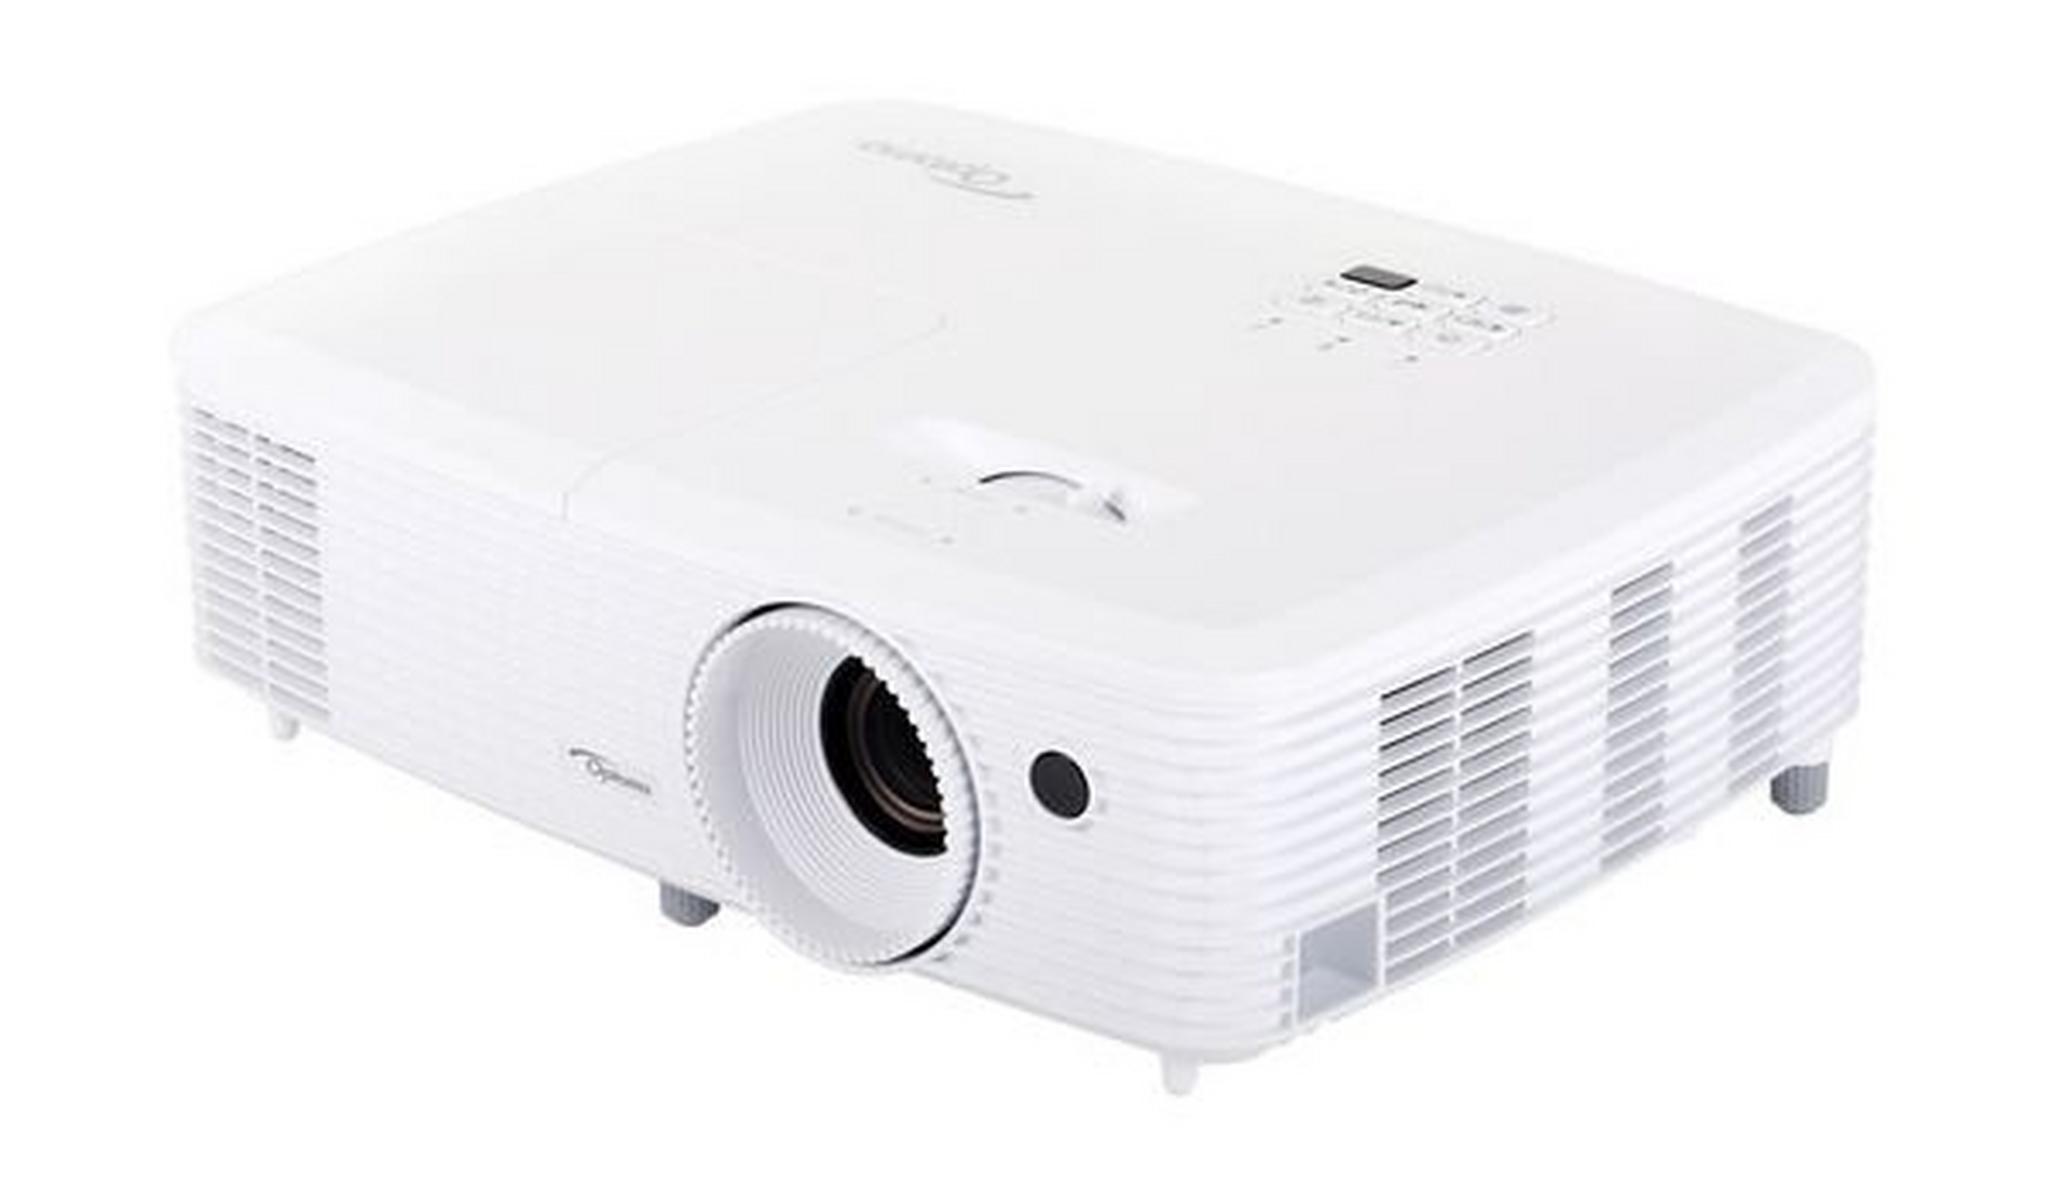 Optoma Technology HD29Darbee Full HD DLP Projector - White